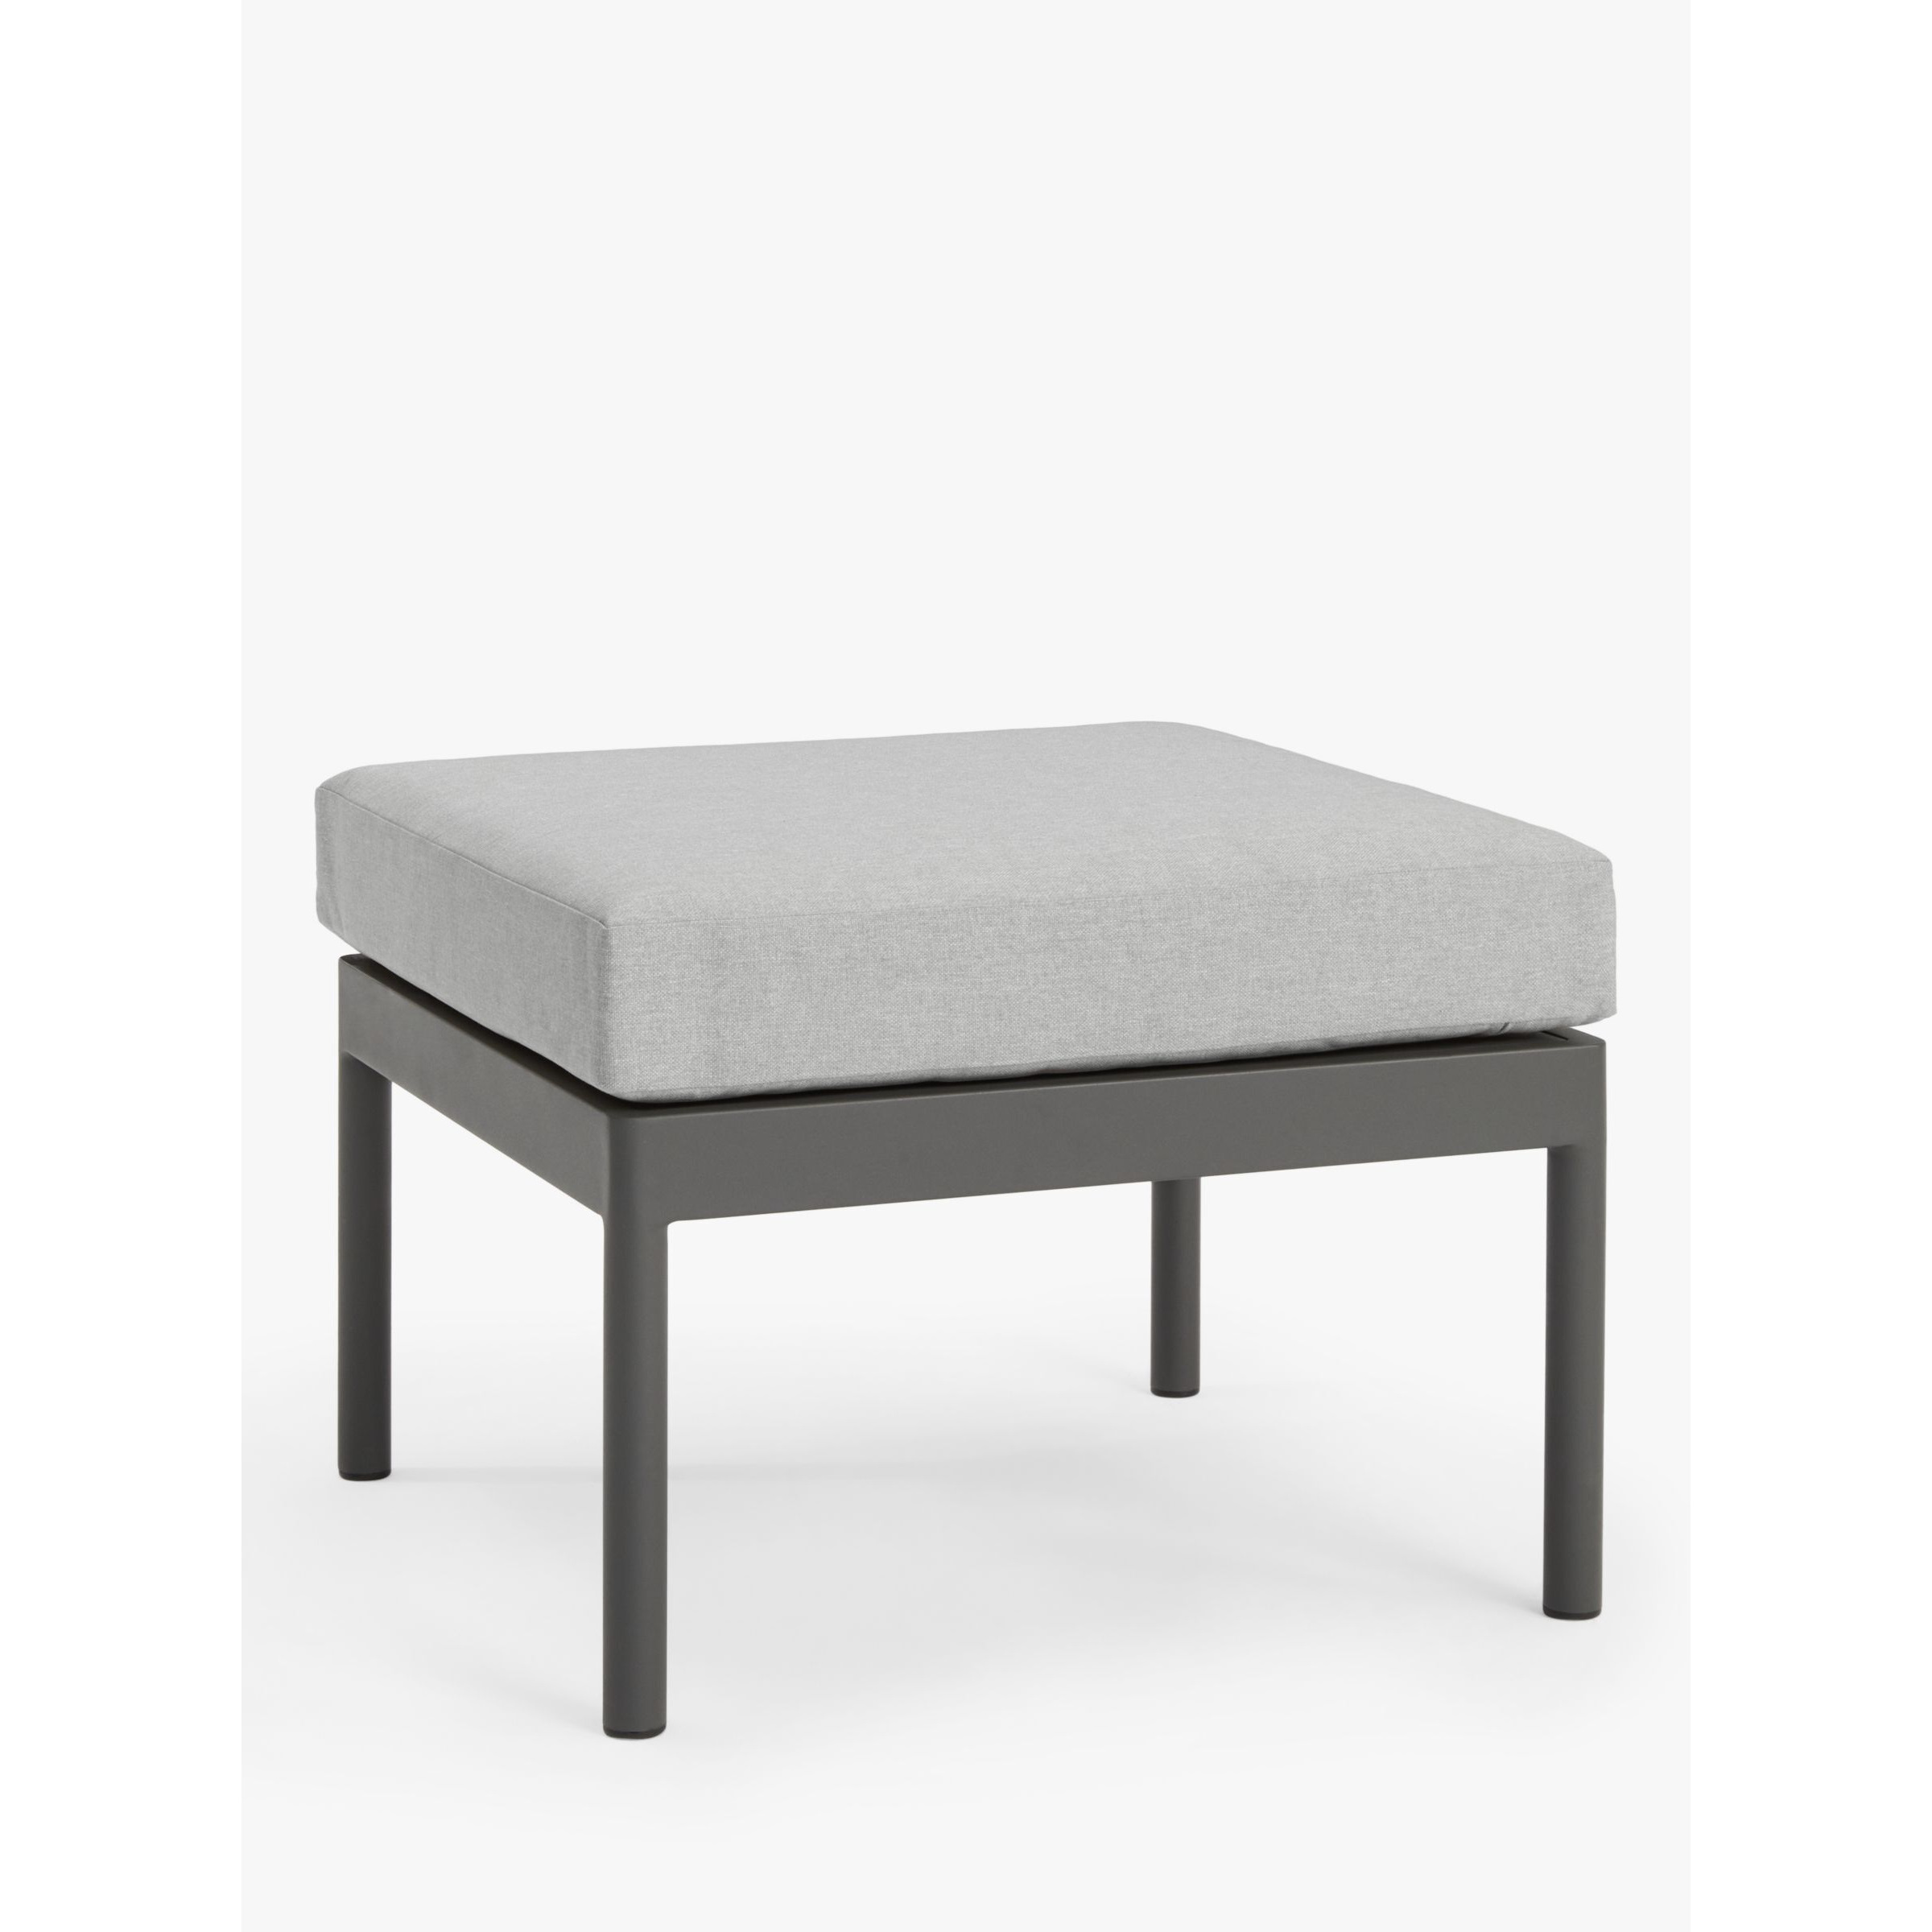 John Lewis Chunky Weave Square Garden Coffee Table/Footstool, Grey - image 1